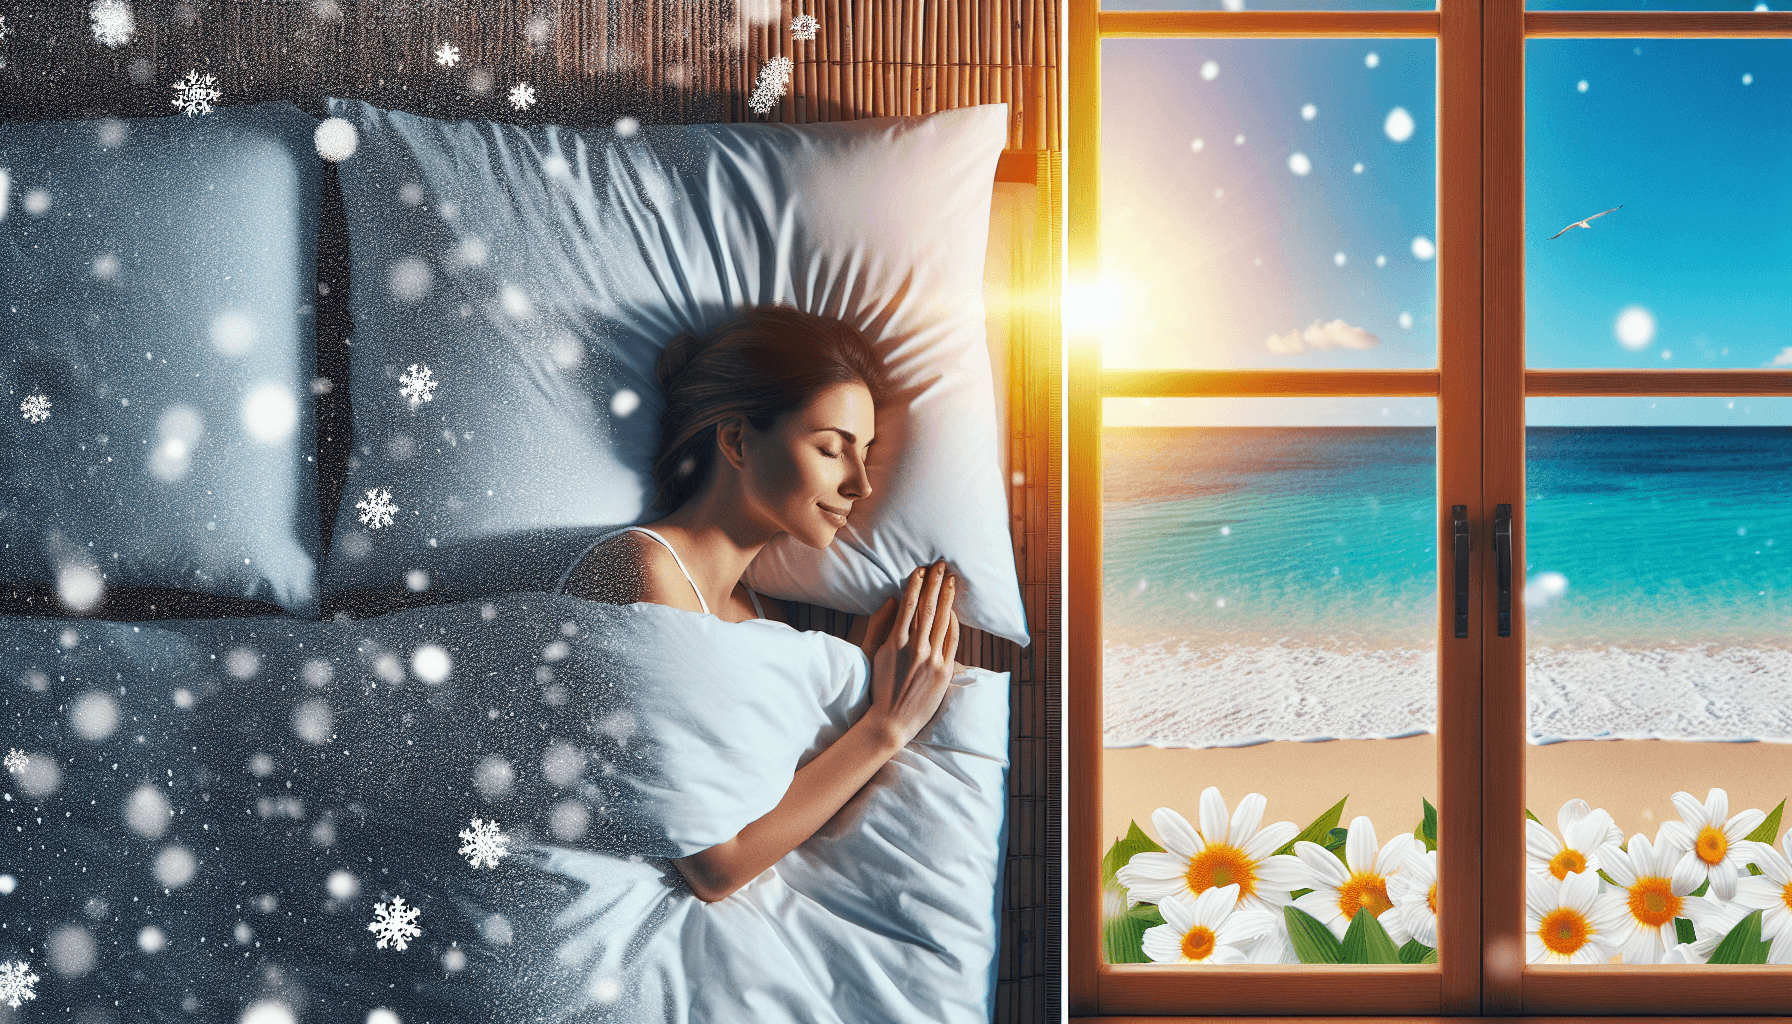 Woman on bamboo sheets and images of all seasons